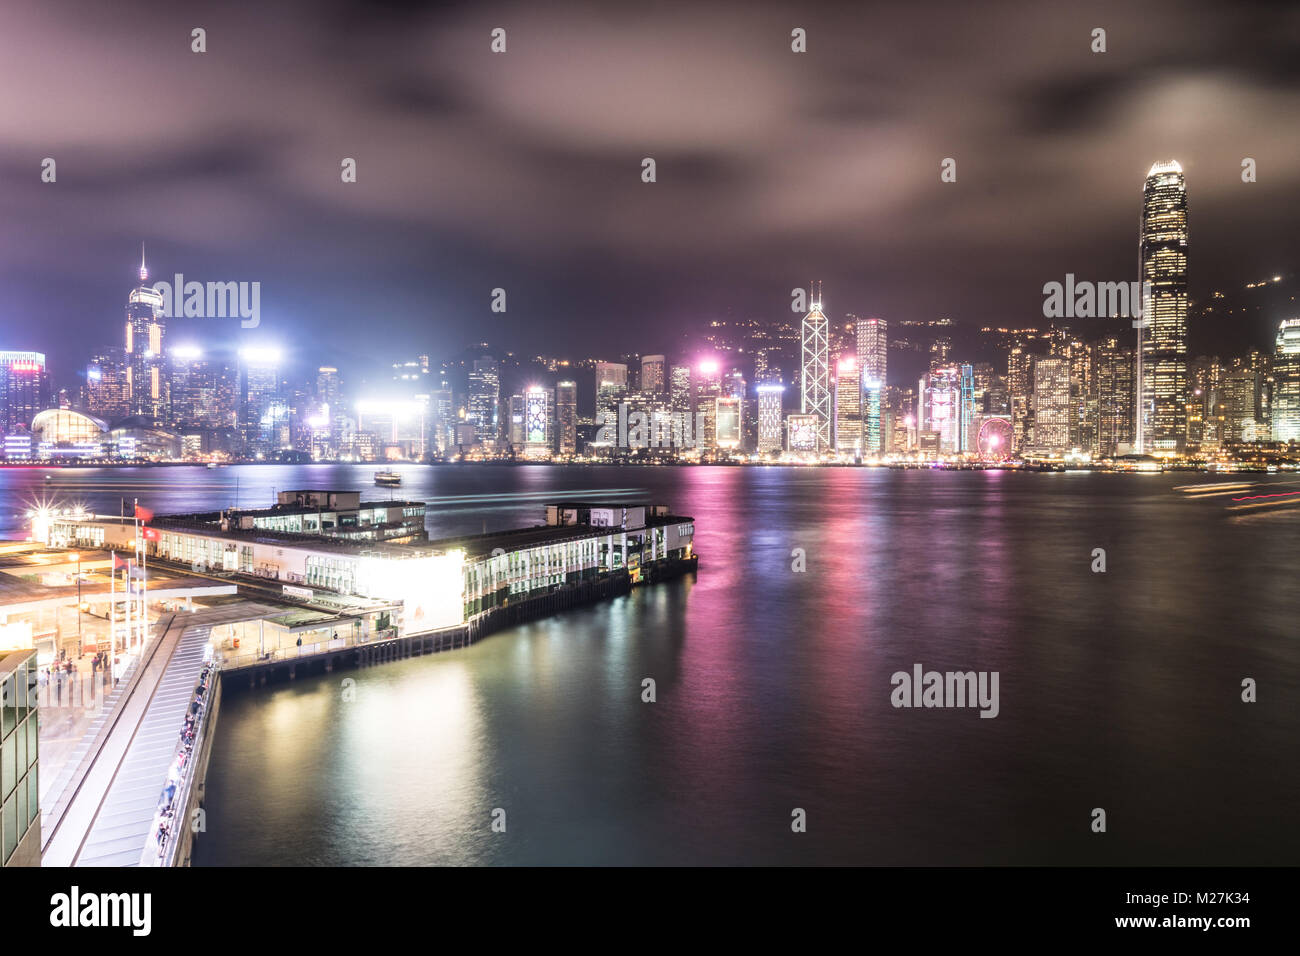 Stunning view of the Star Ferry pier in Tsim Sha Tsui in Kowloon and the Hong Kong island famous skyline across the Victoria harbour in Hong Kong at n Stock Photo